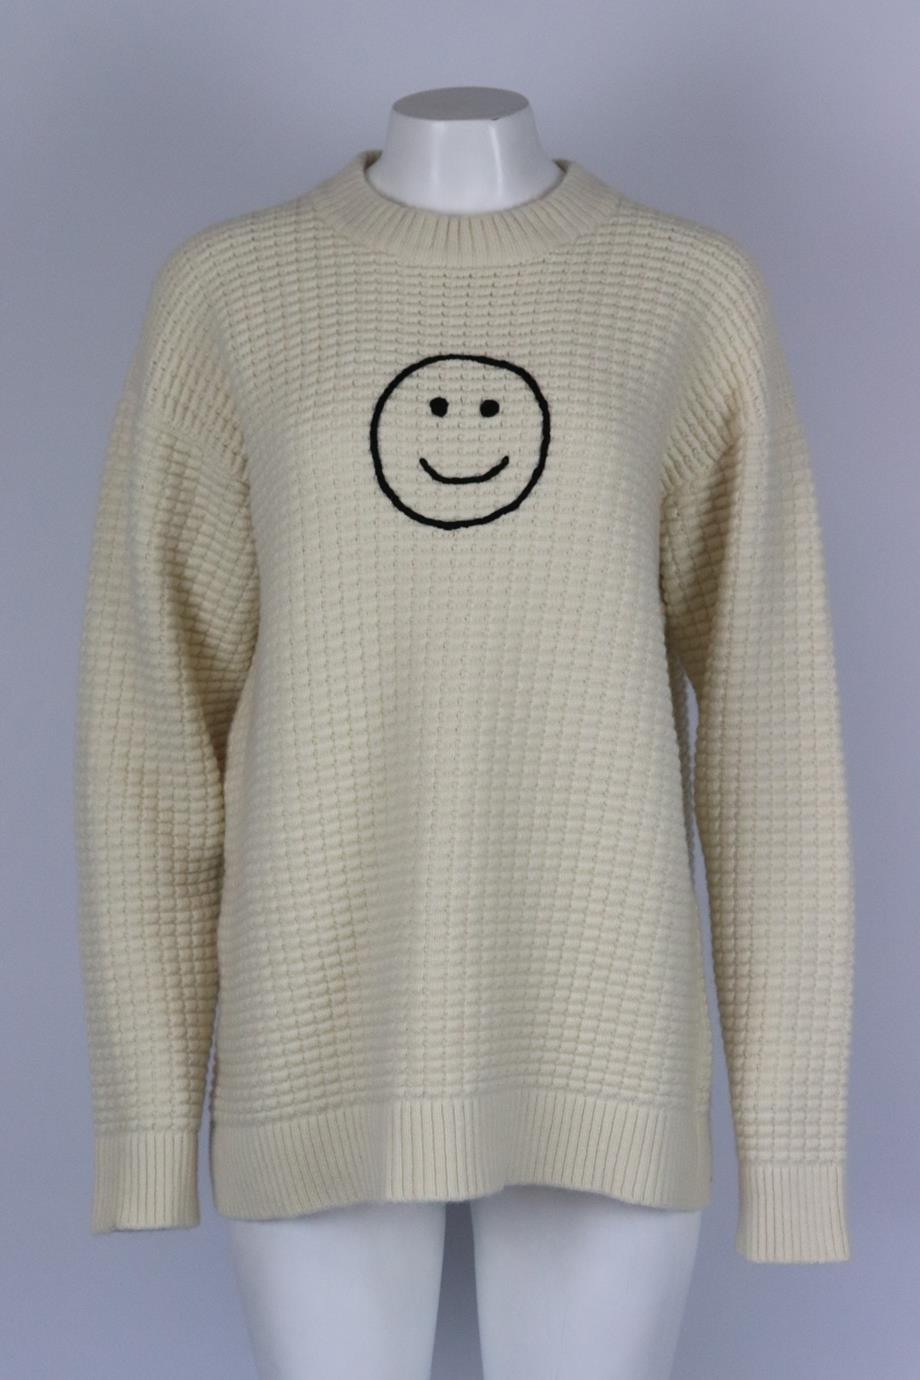 The Elder Statesman embroidered waffle knit cashmere sweater. Cream. Long sleeve, crewneck. Slips on. 100% Cashmere. Size: XSmall (UK 6, US 2, FR 34, IT 38). Bust: 48 in. Waist: 46 in. Hips: 45 in. Length: 27 in. Very good condition - As new